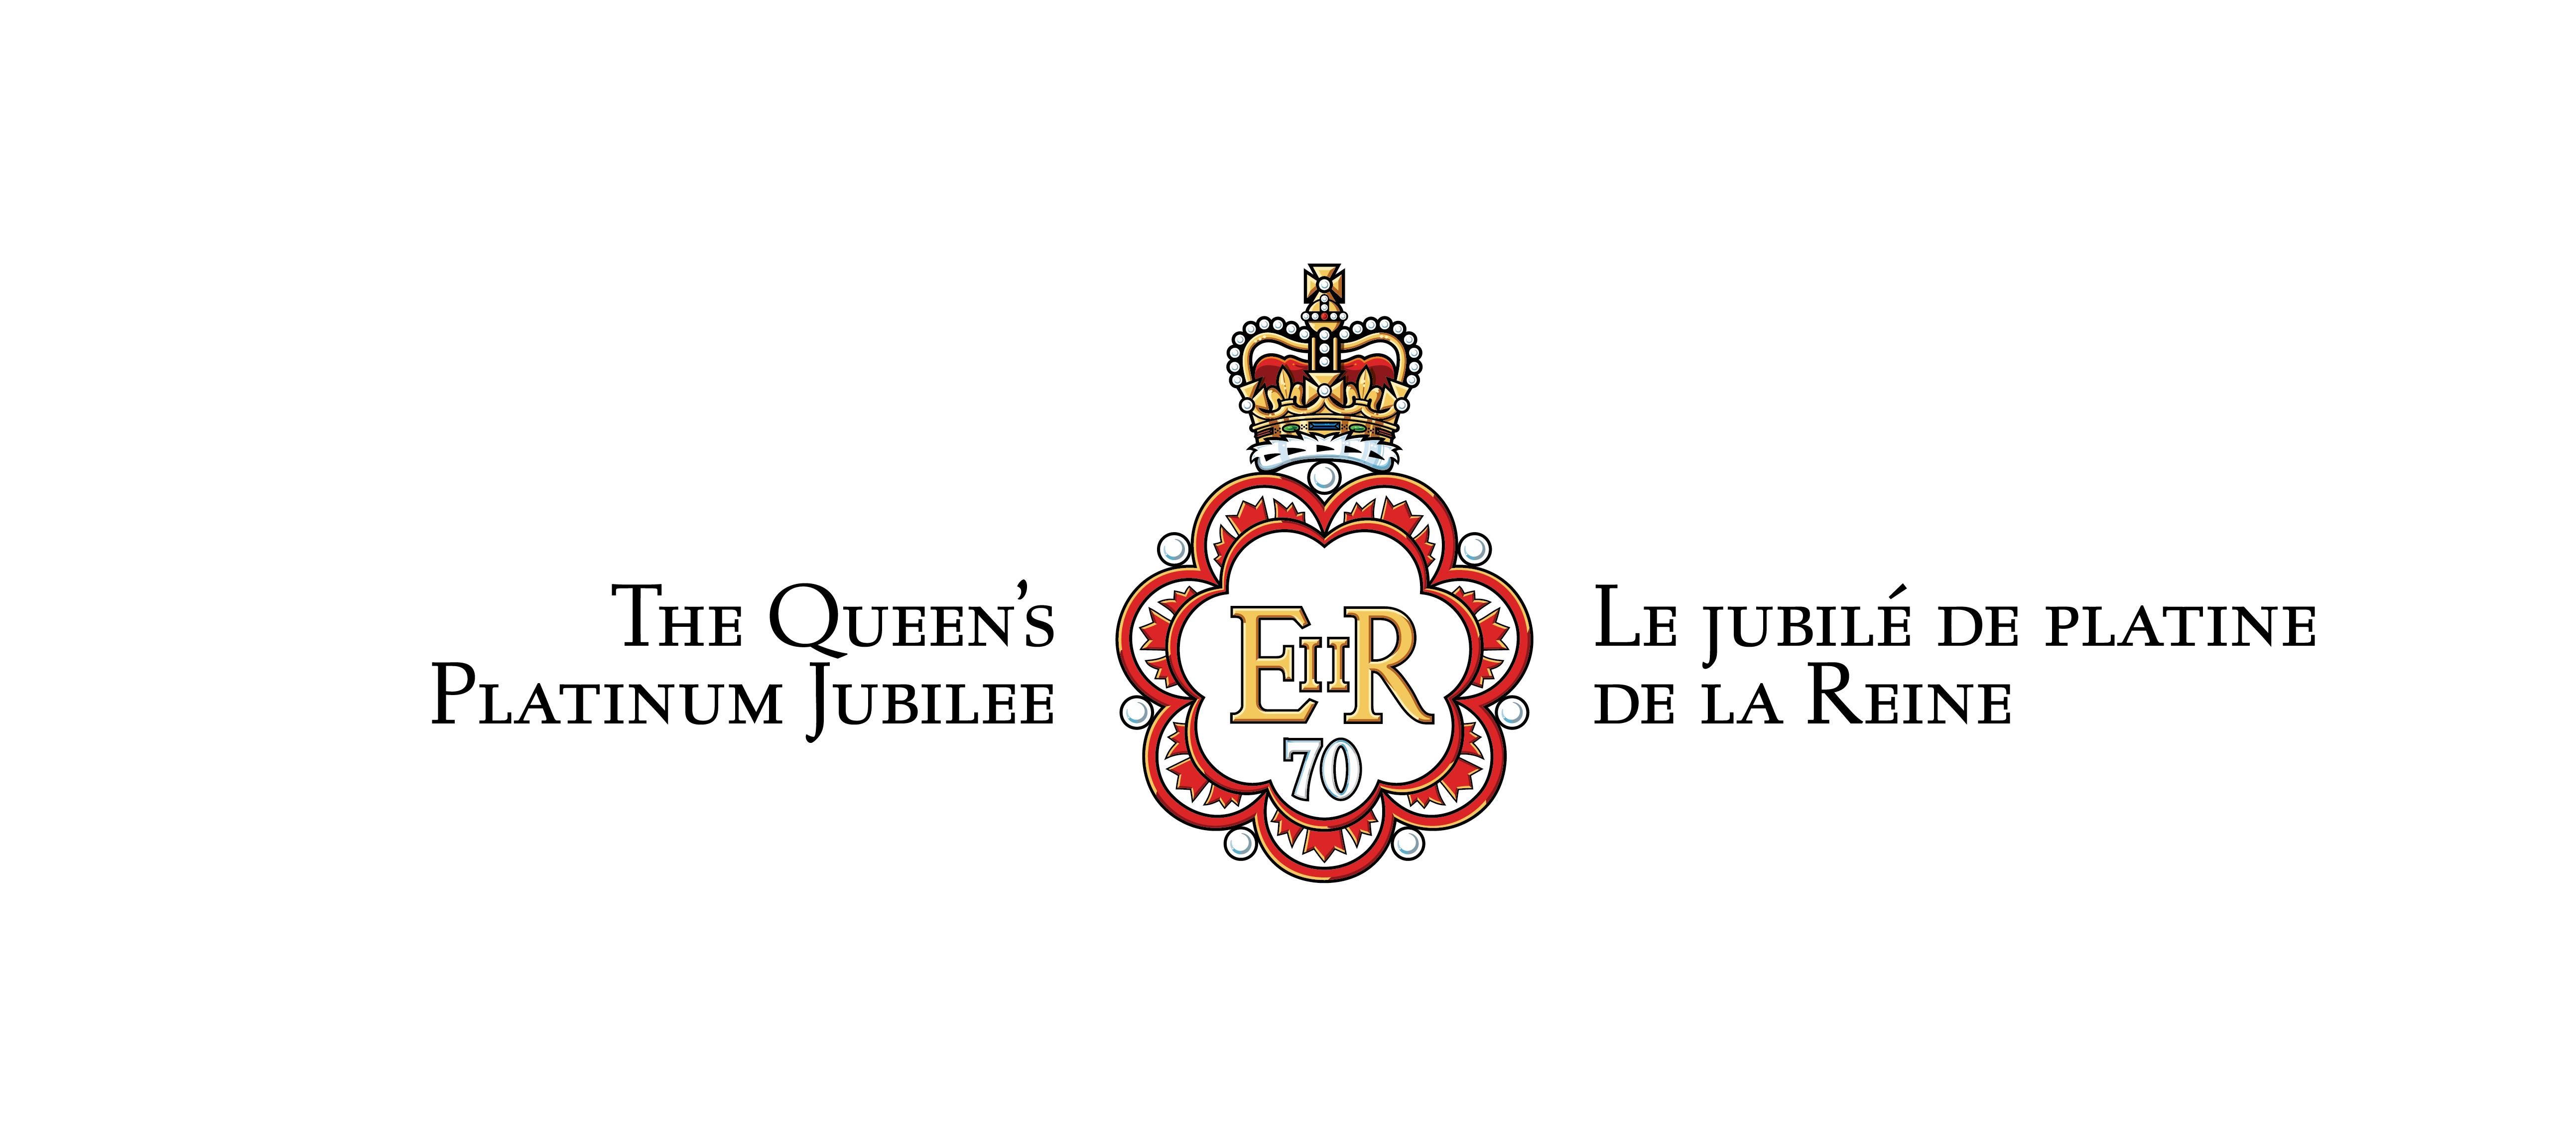 A centered full-colour vector art version of the Platinum Jubilee emblem with text: The Queen’s Platinum Jubilee / Le jubilé de platine de la Reine